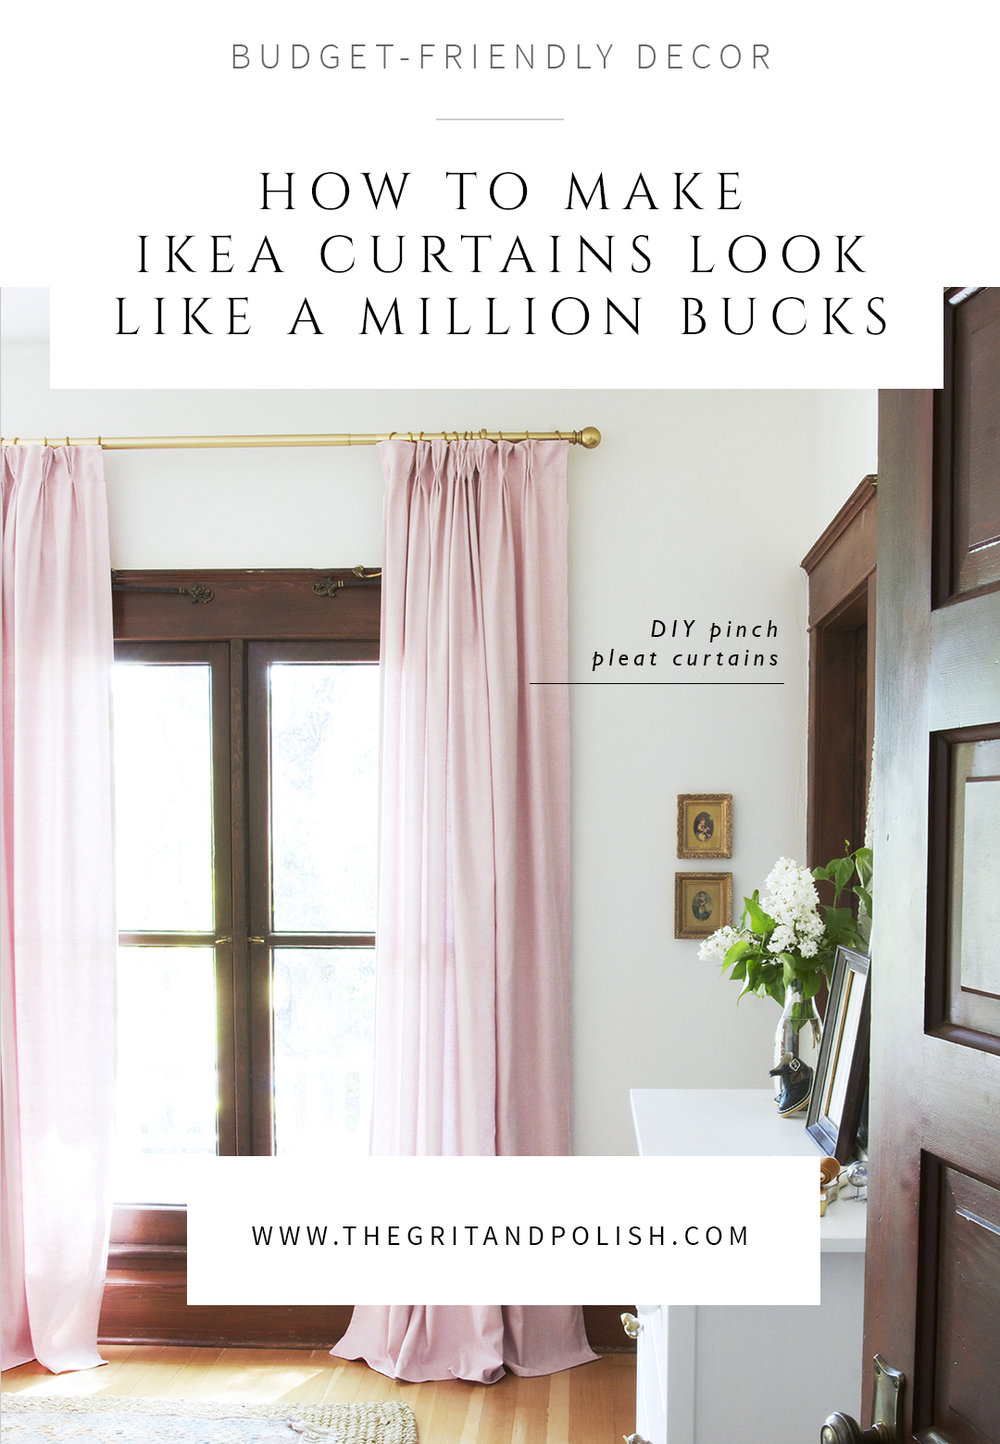 Diy Pinch Pleat Curtains How To Make, How To Make Home Curtains